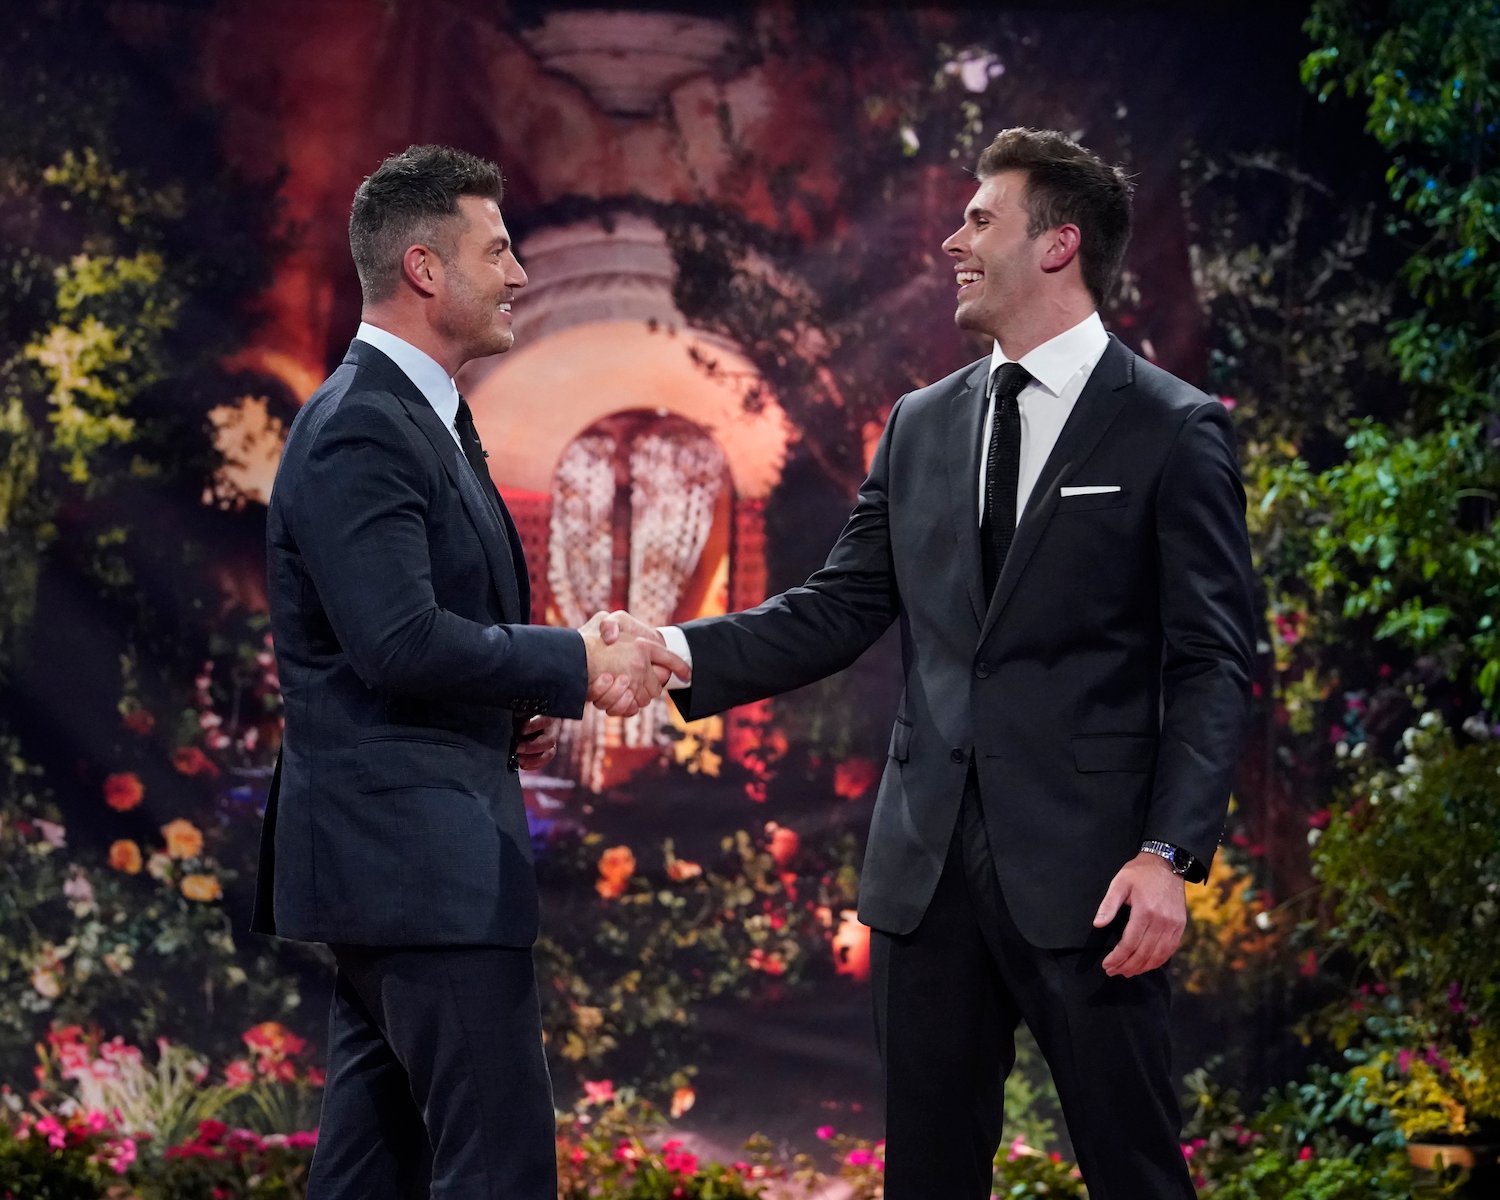 Jesse Palmer and Zach Shallcross shaking hands on stage. Zach is the lead for 'The Bachelor' Season 27